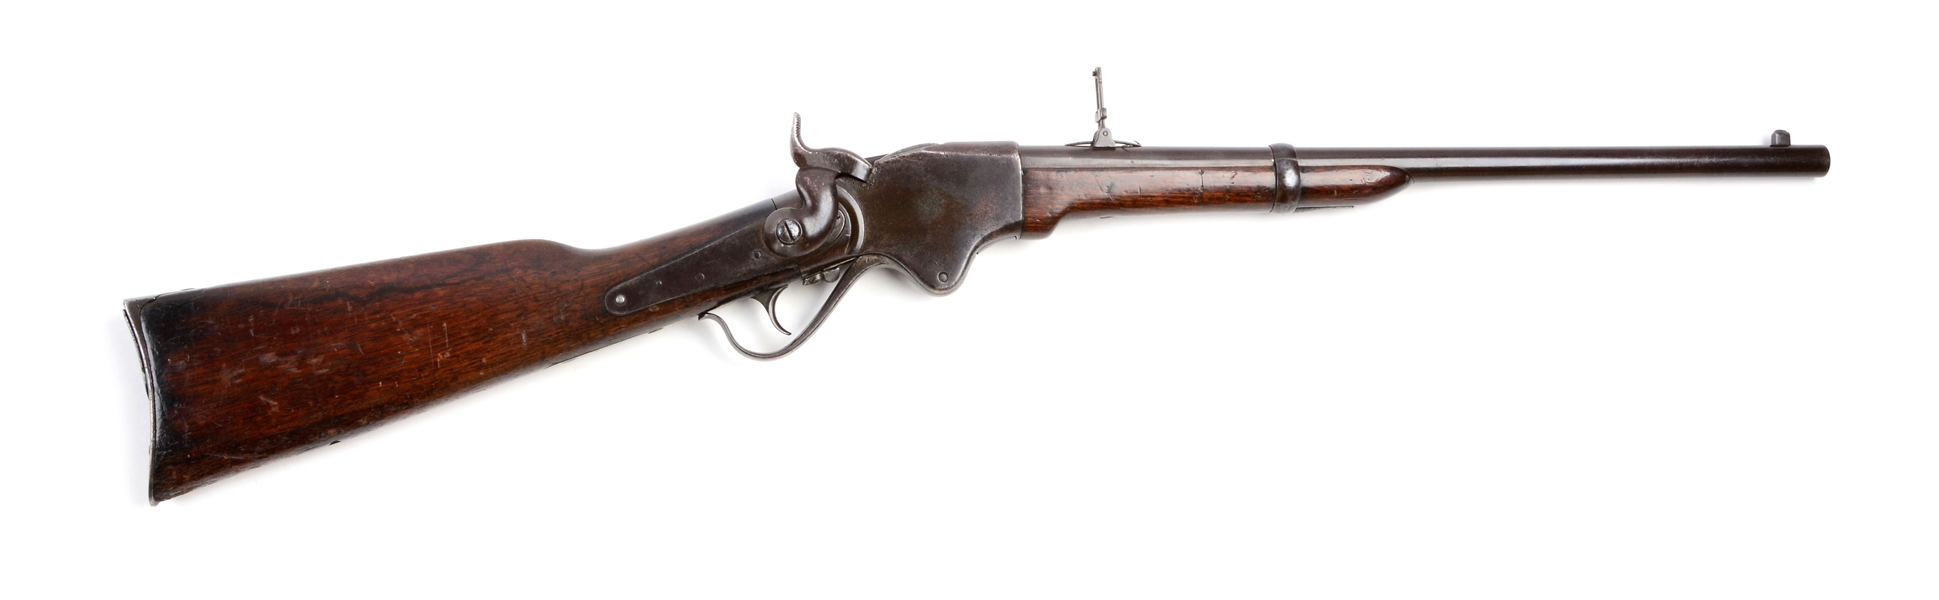 (A^) SPENCER MODEL 1865 LEVER ACTION REPEATING CARBINE.